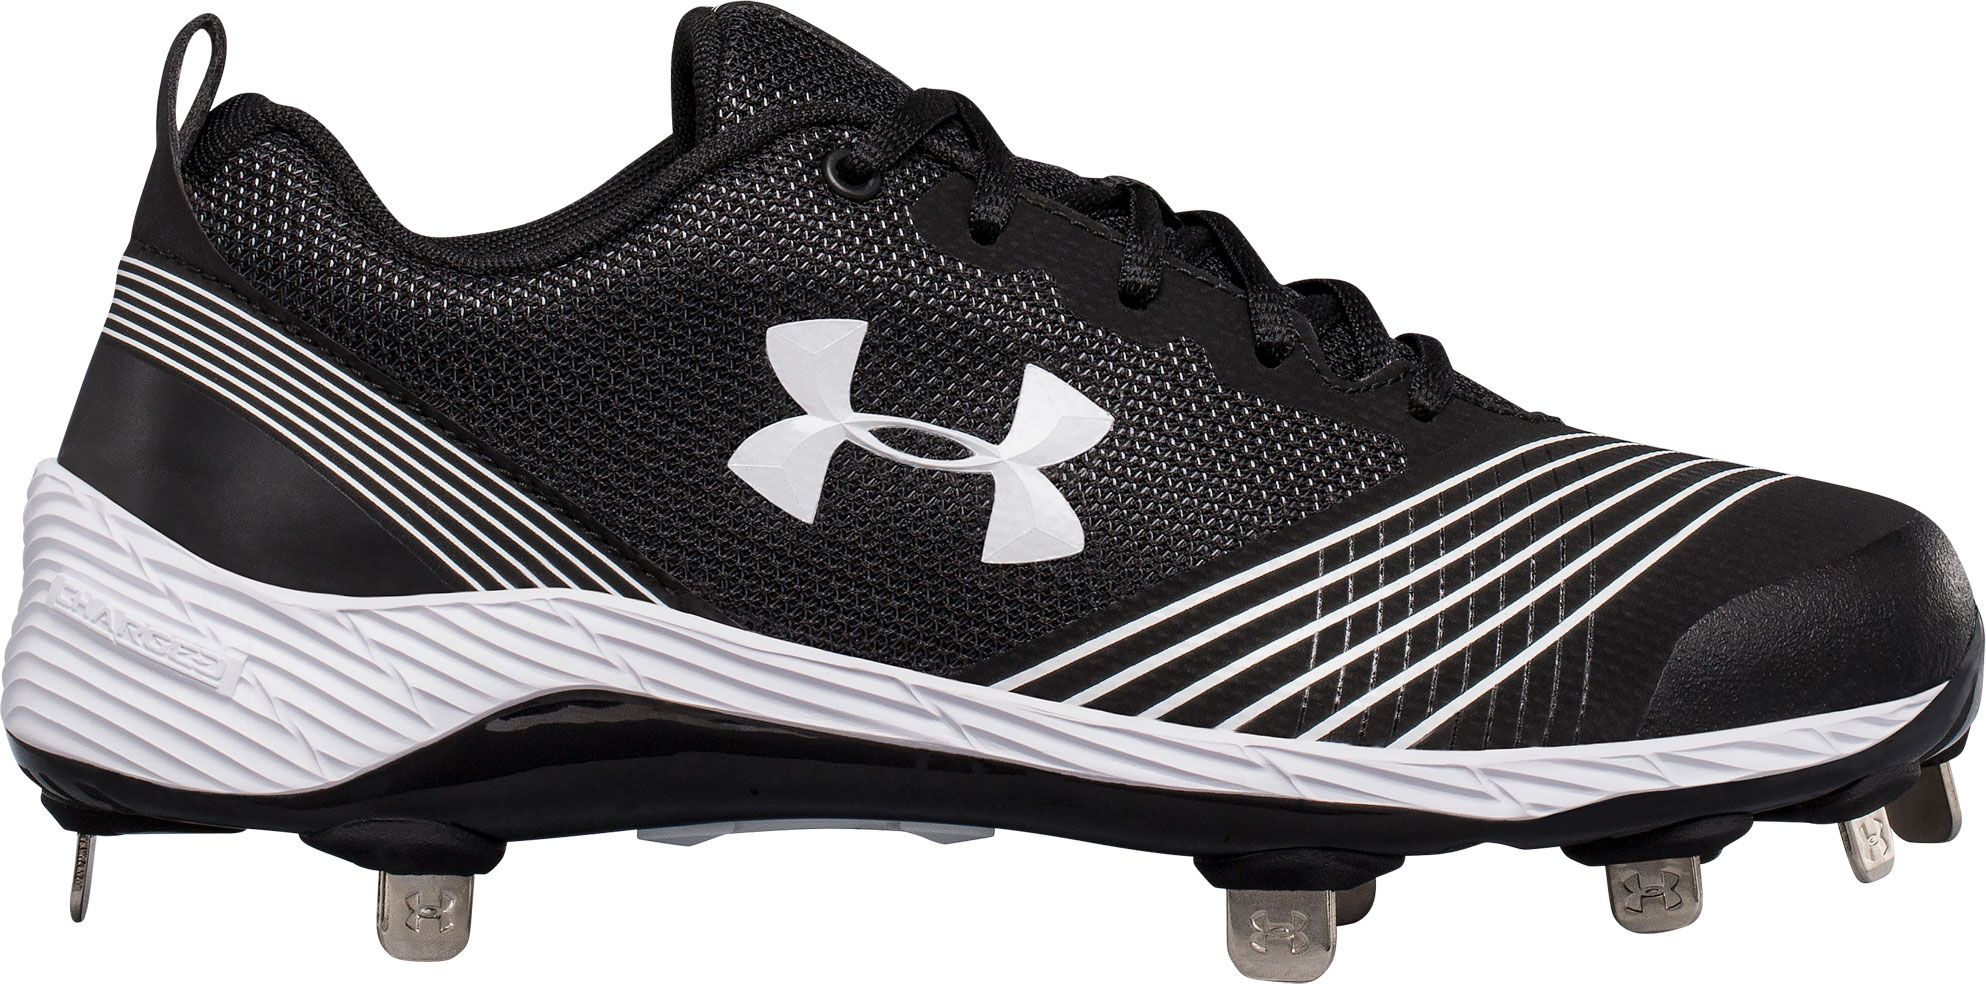 BRANDED UNDER ARMOUR PINK GRAY & WHITE SIZE 6 to 11 WOMEN'S SOFTBALL CLEATS 